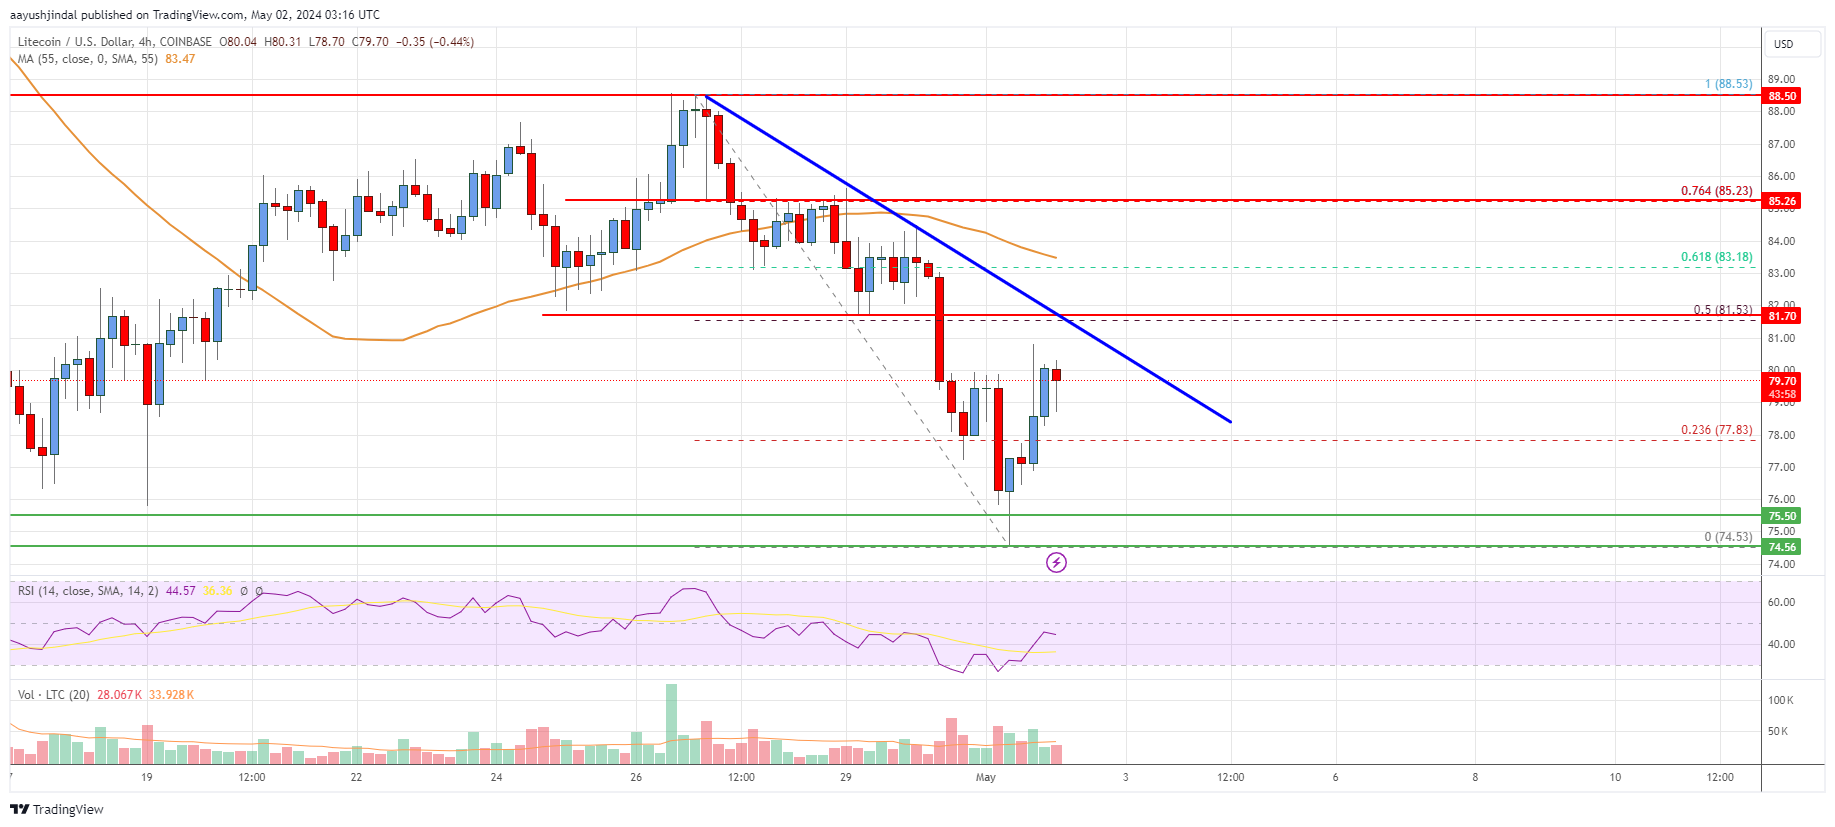 Litecoin (LTC) Price Analysis: Recovery Could Be Capped Near $82